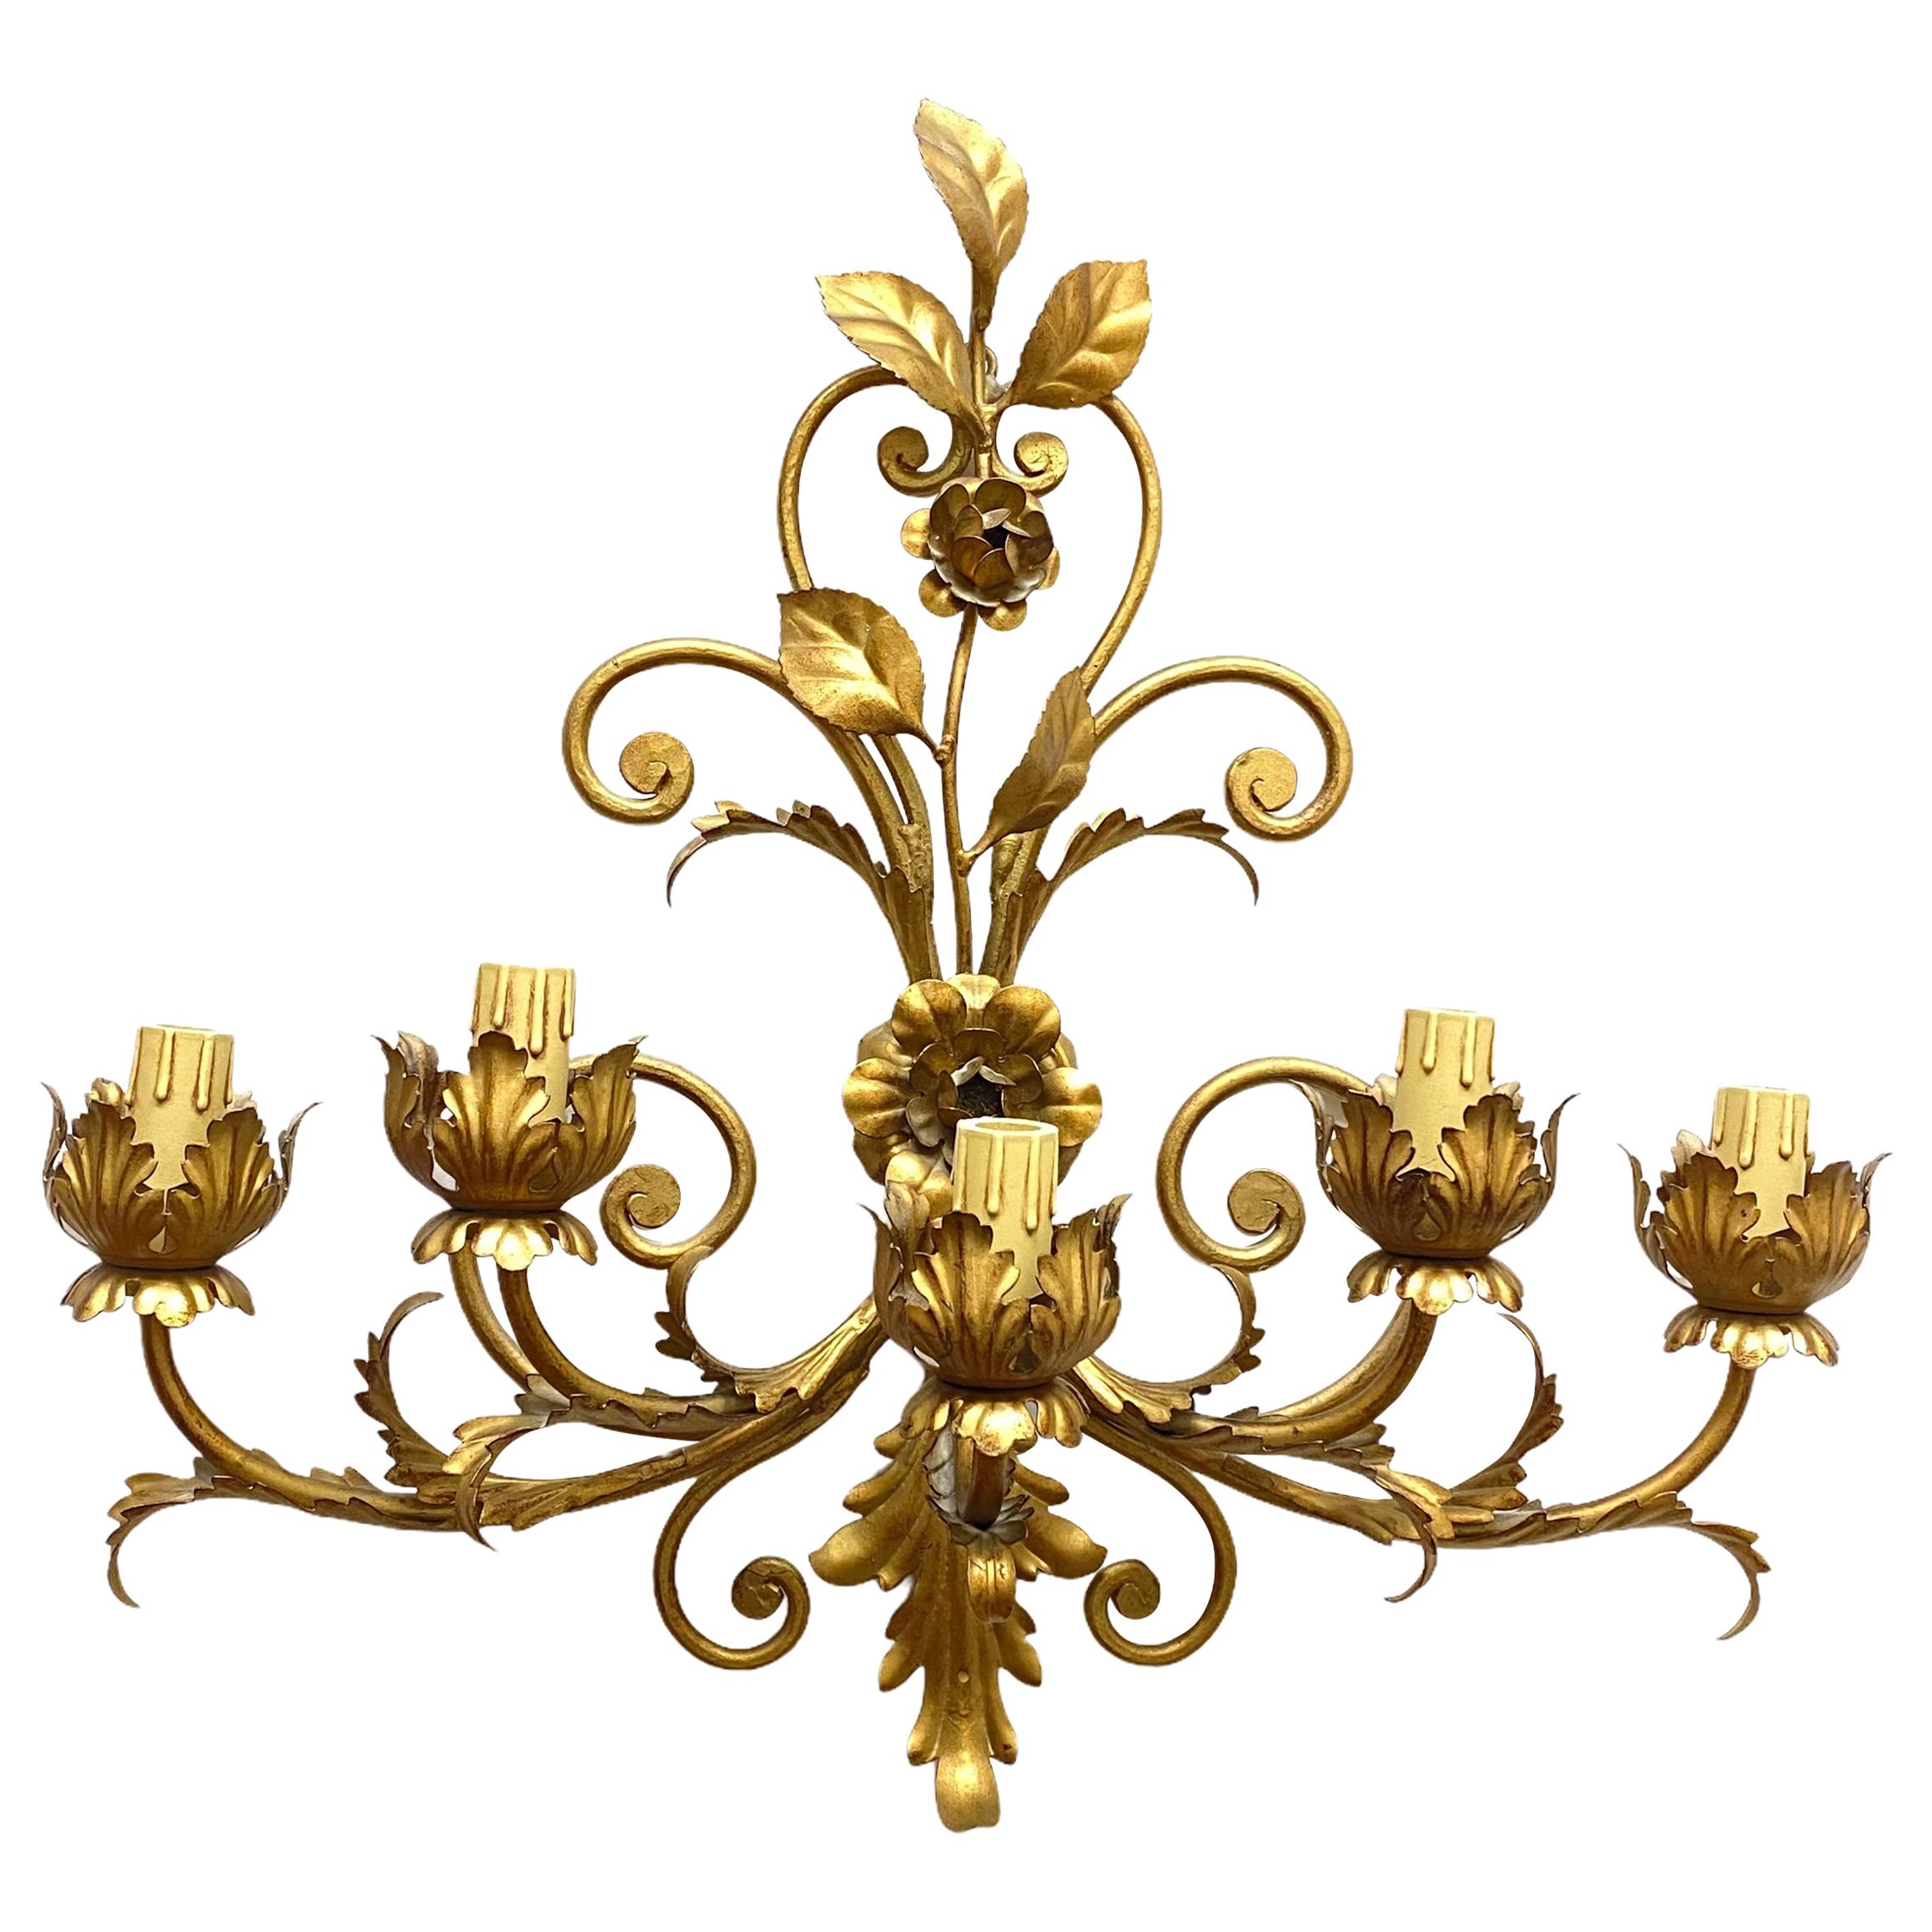 Stunning Five-Light Gilt Metal Leafs Tole Hollywood Regency Sconce, Italy, 1960s For Sale